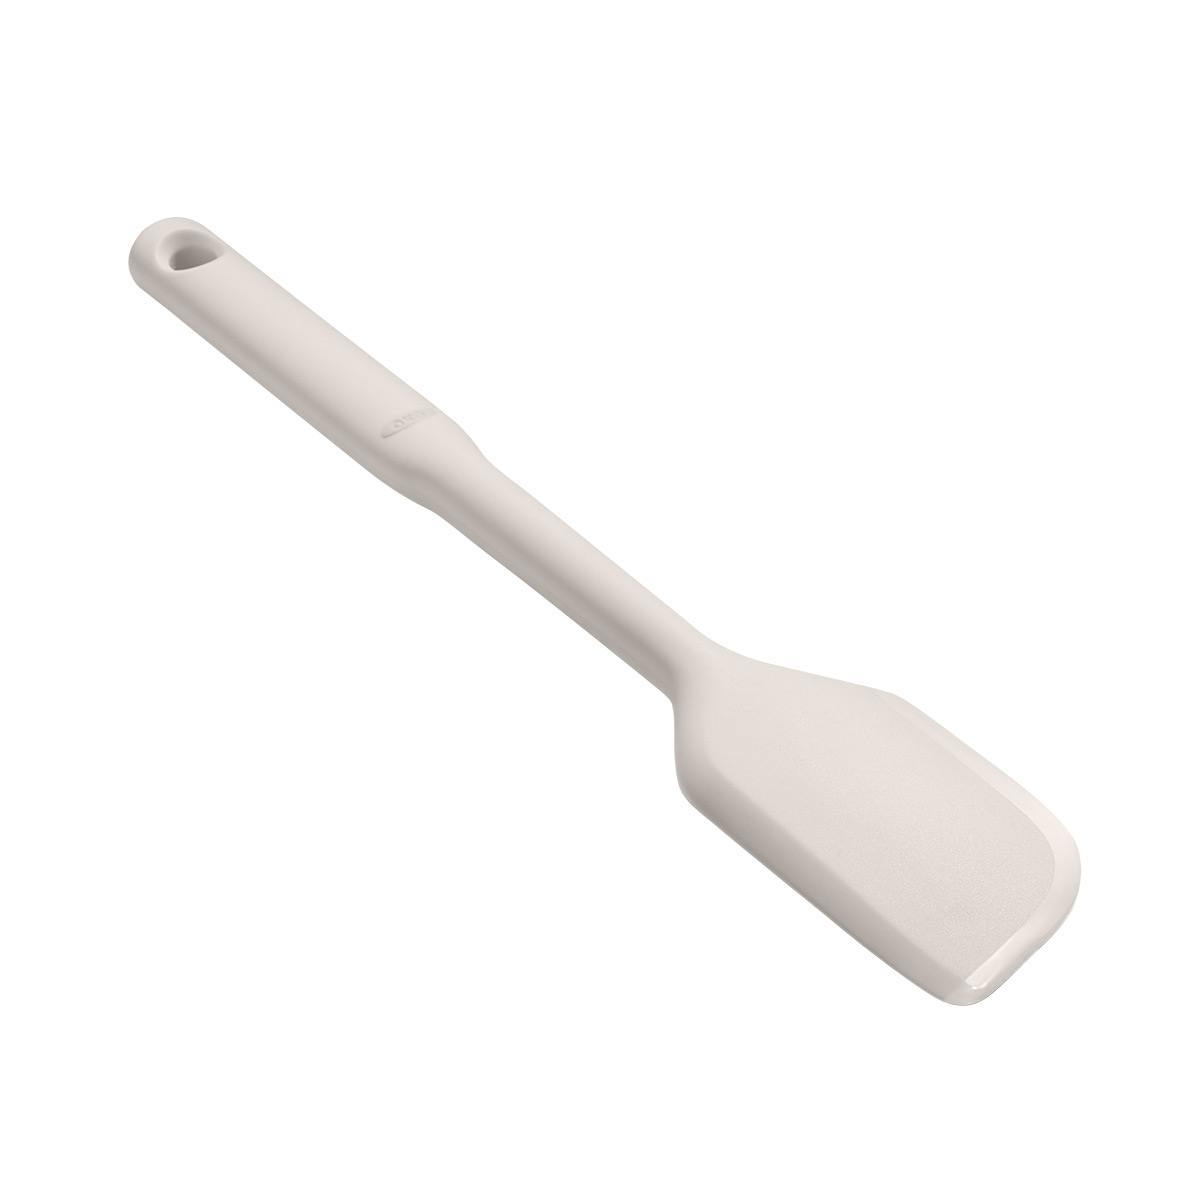 https://www.containerstore.com/catalogimages/427587/10087975-Medium-Silicone-Spatula-VEN.jpg